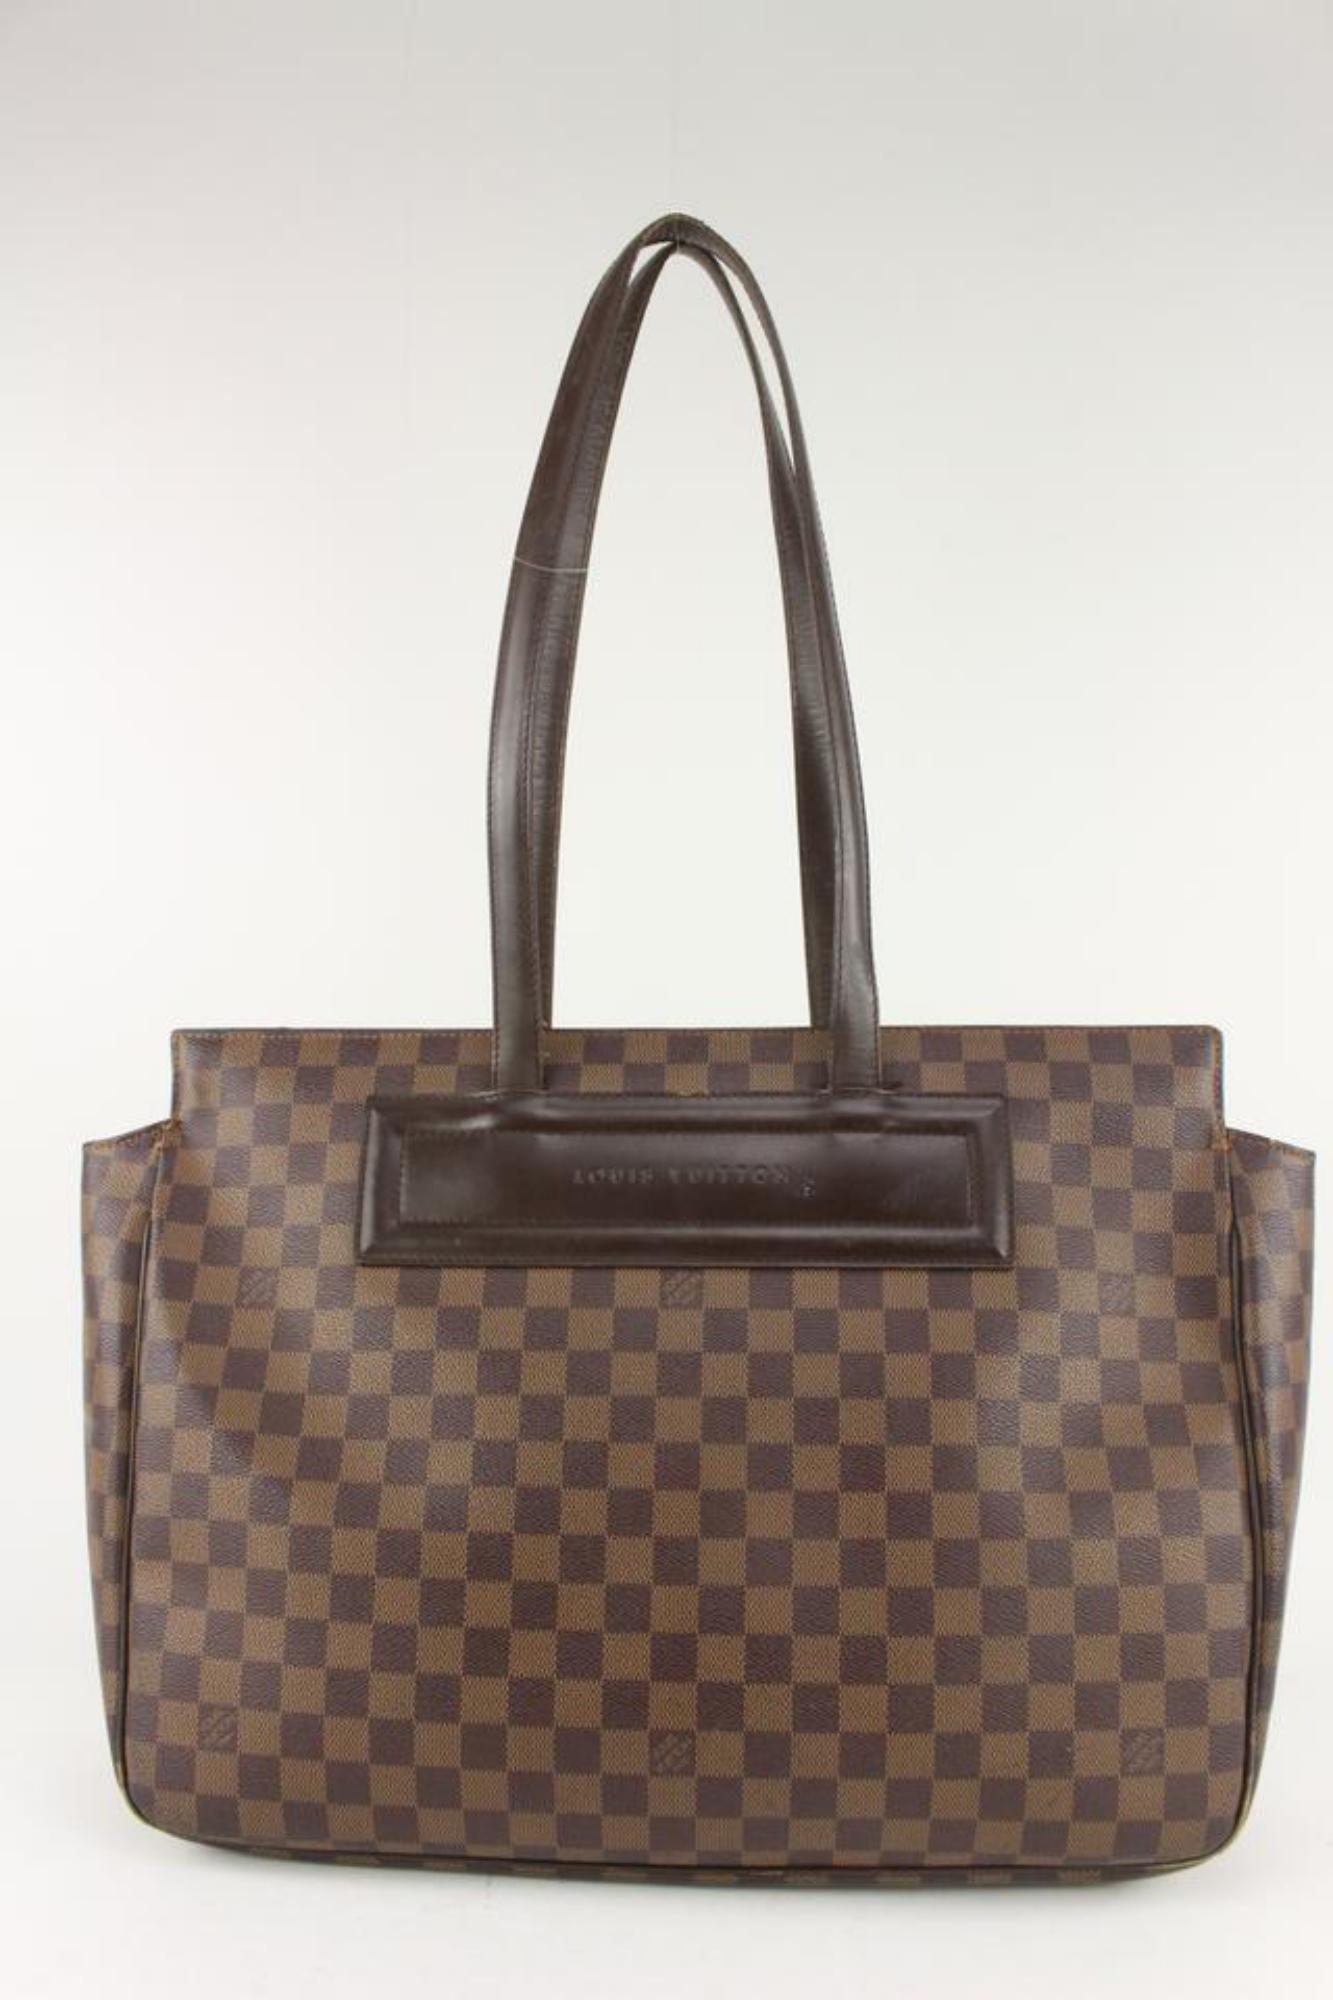 Louis Vuitton Discontinued Damier Ebene Parioli Tote bag 1119lv53 In Good Condition In Dix hills, NY